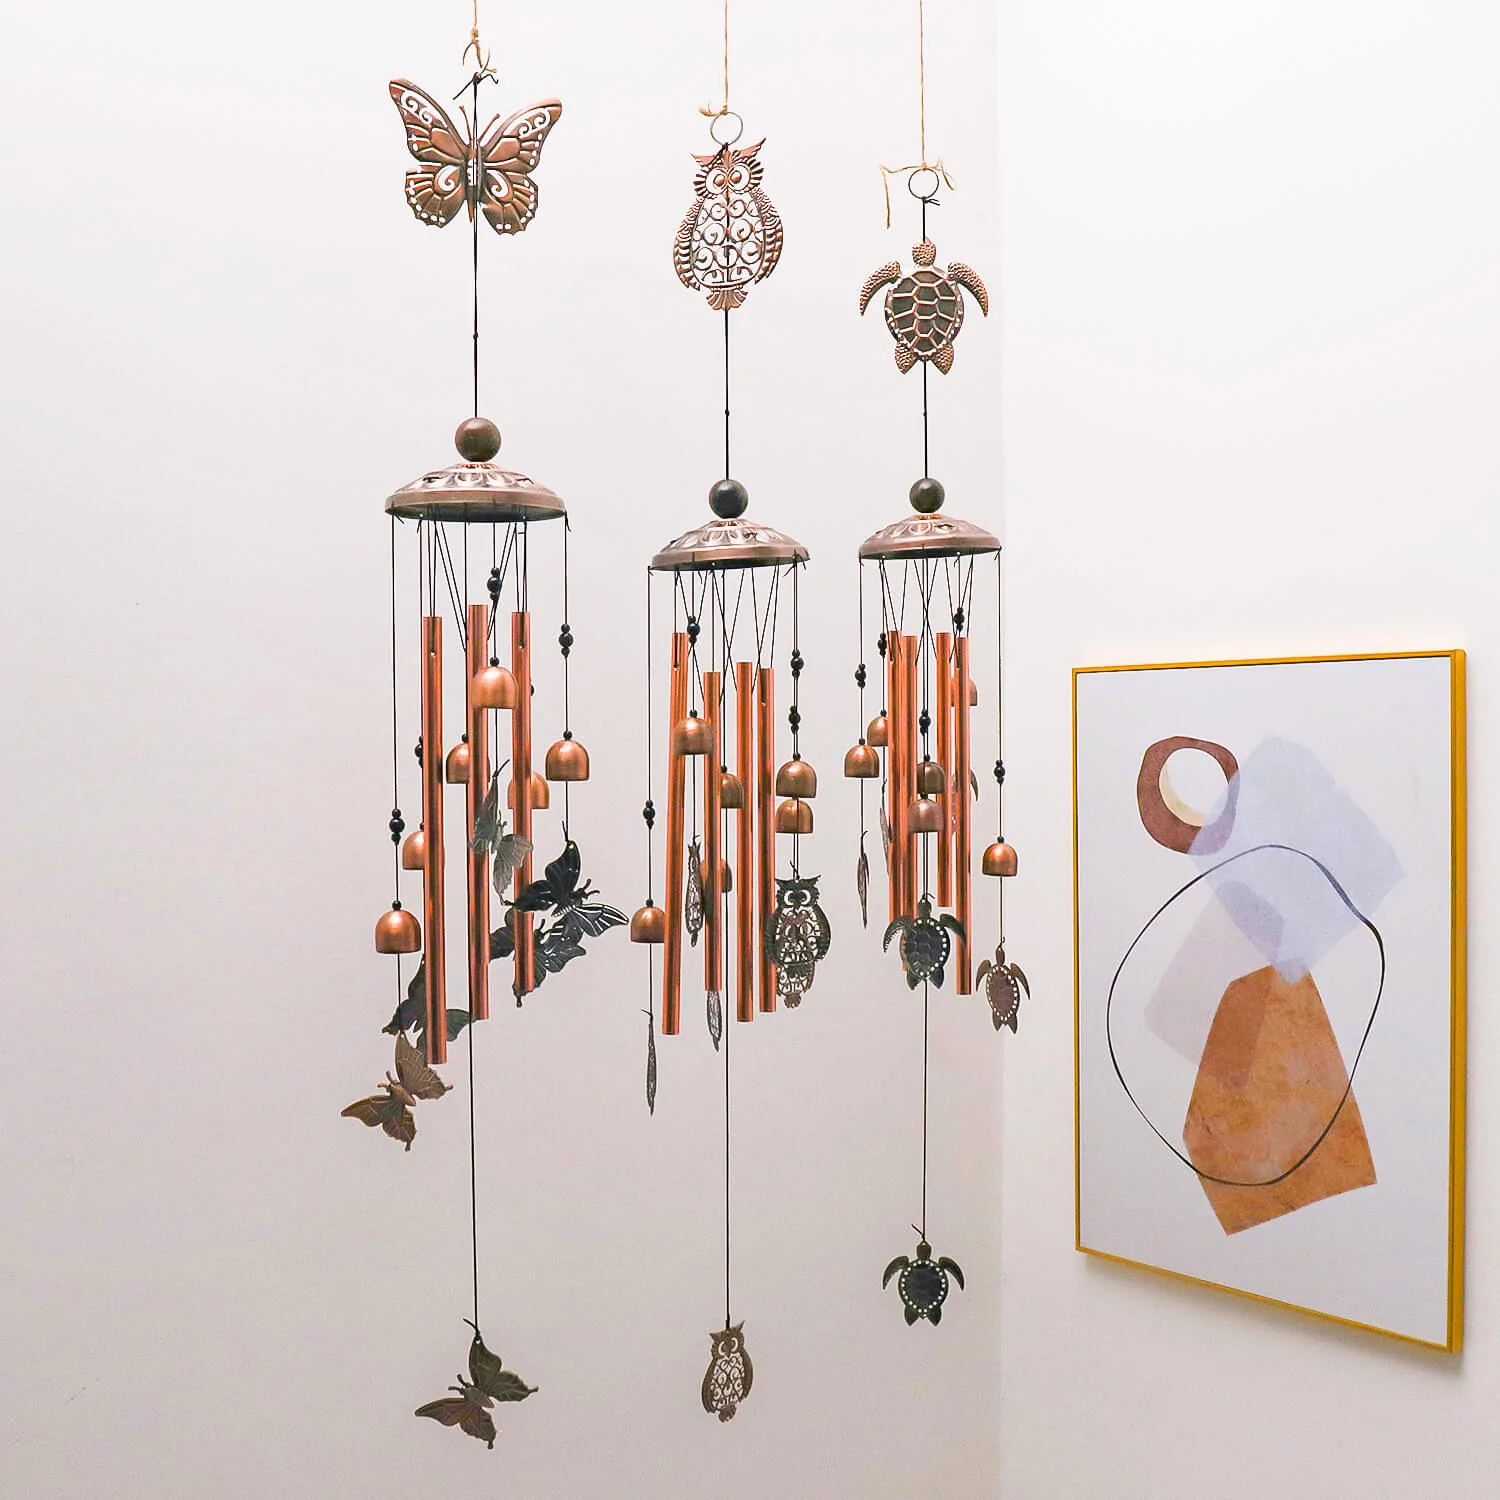 Handmade Animal Wind Chime Pendants for Home Decor/Gifts